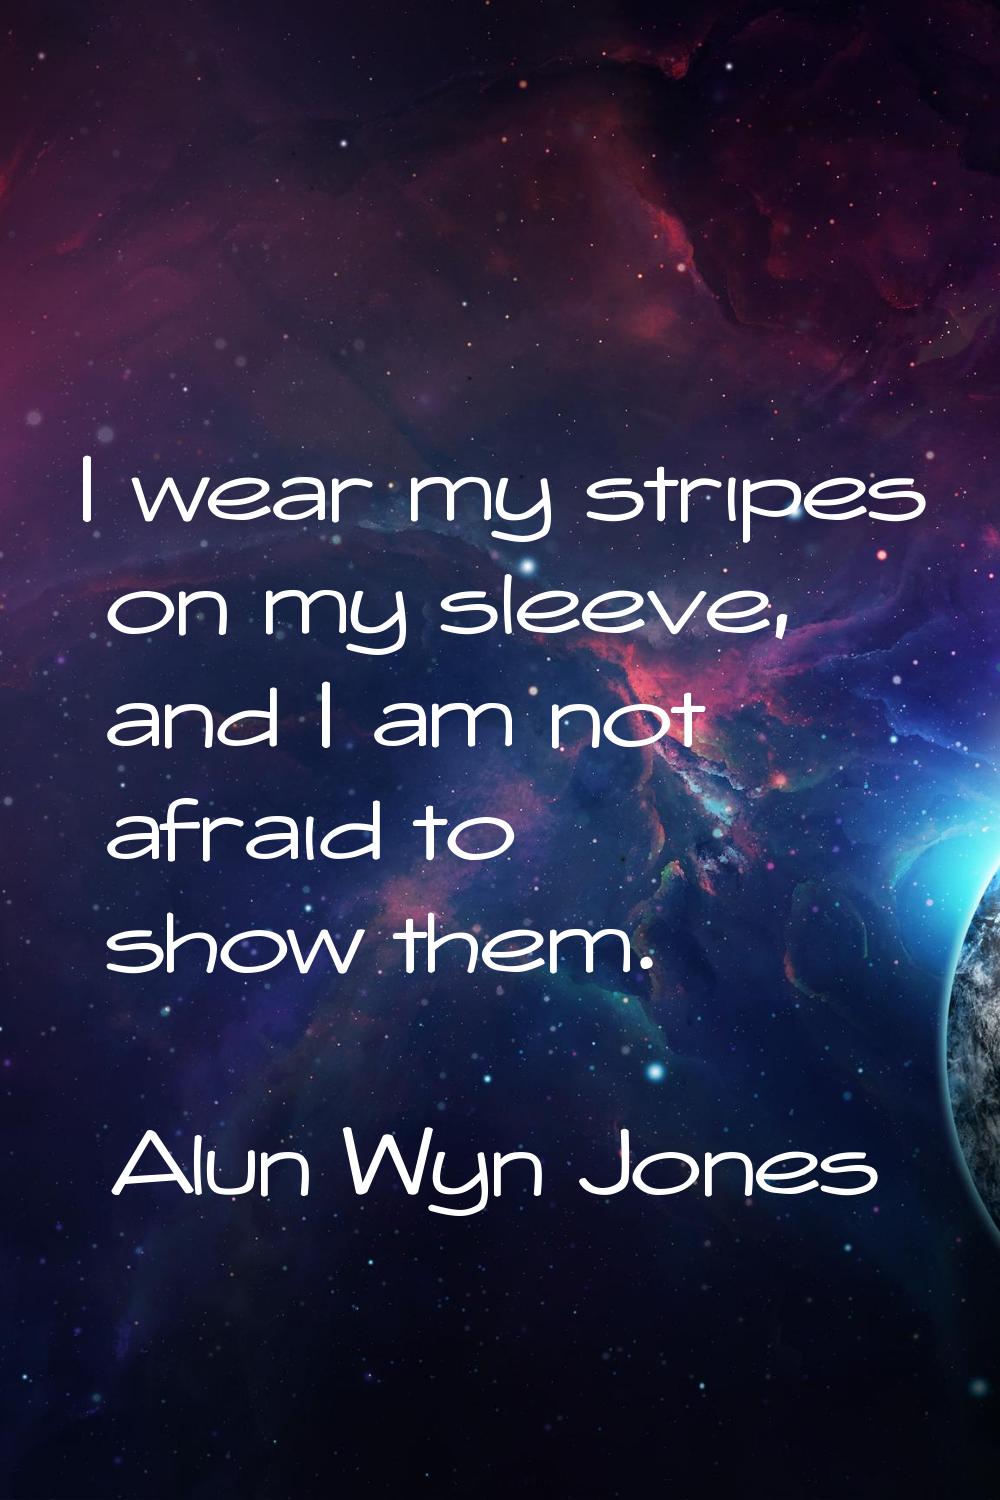 I wear my stripes on my sleeve, and I am not afraid to show them.